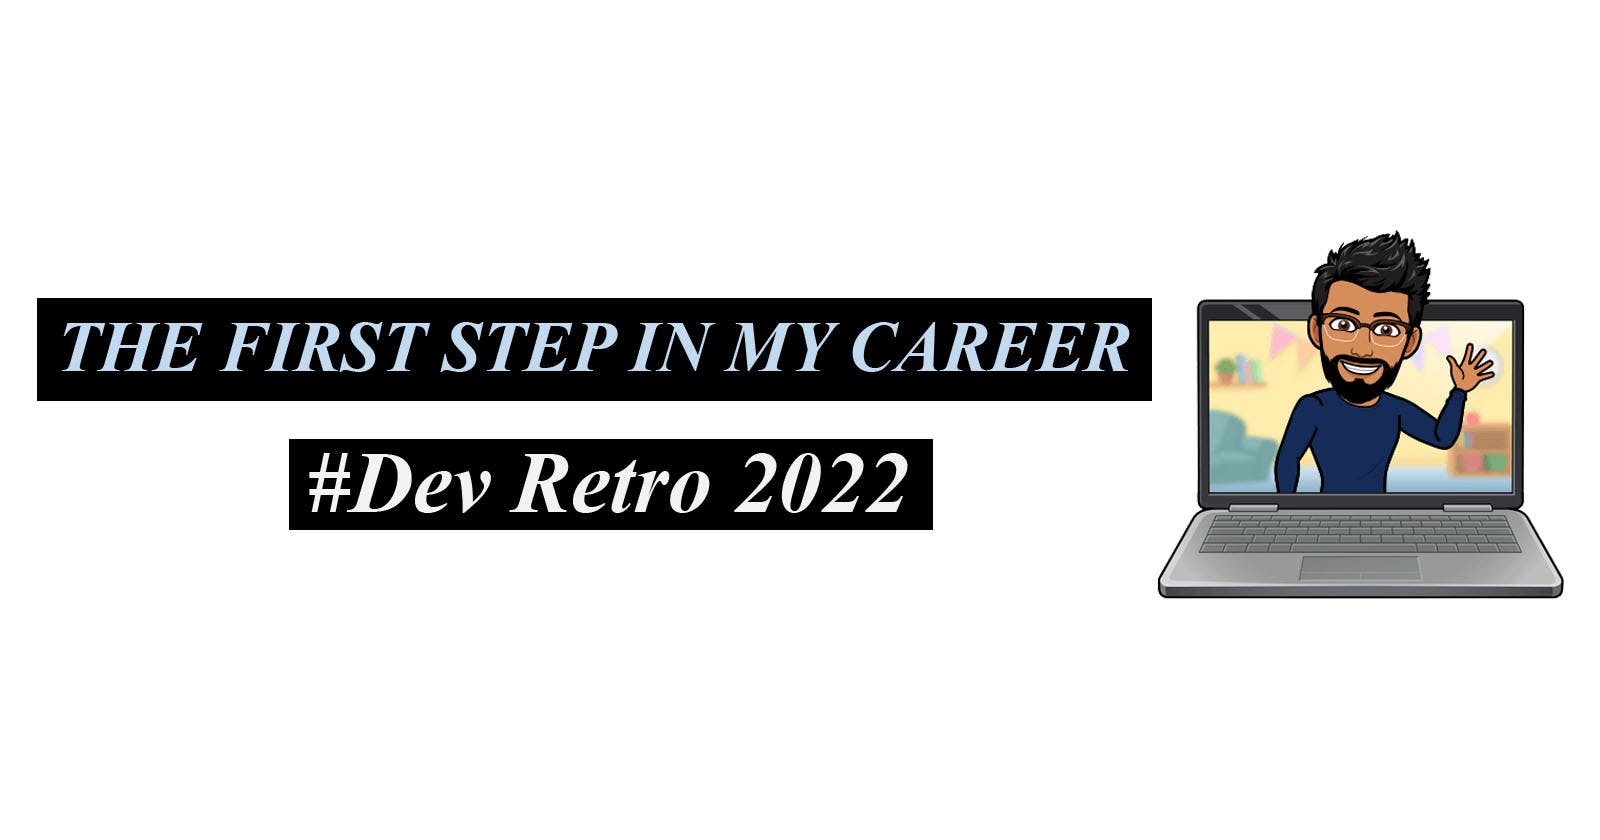 The First Step In My Career -  Dev Retro 2022